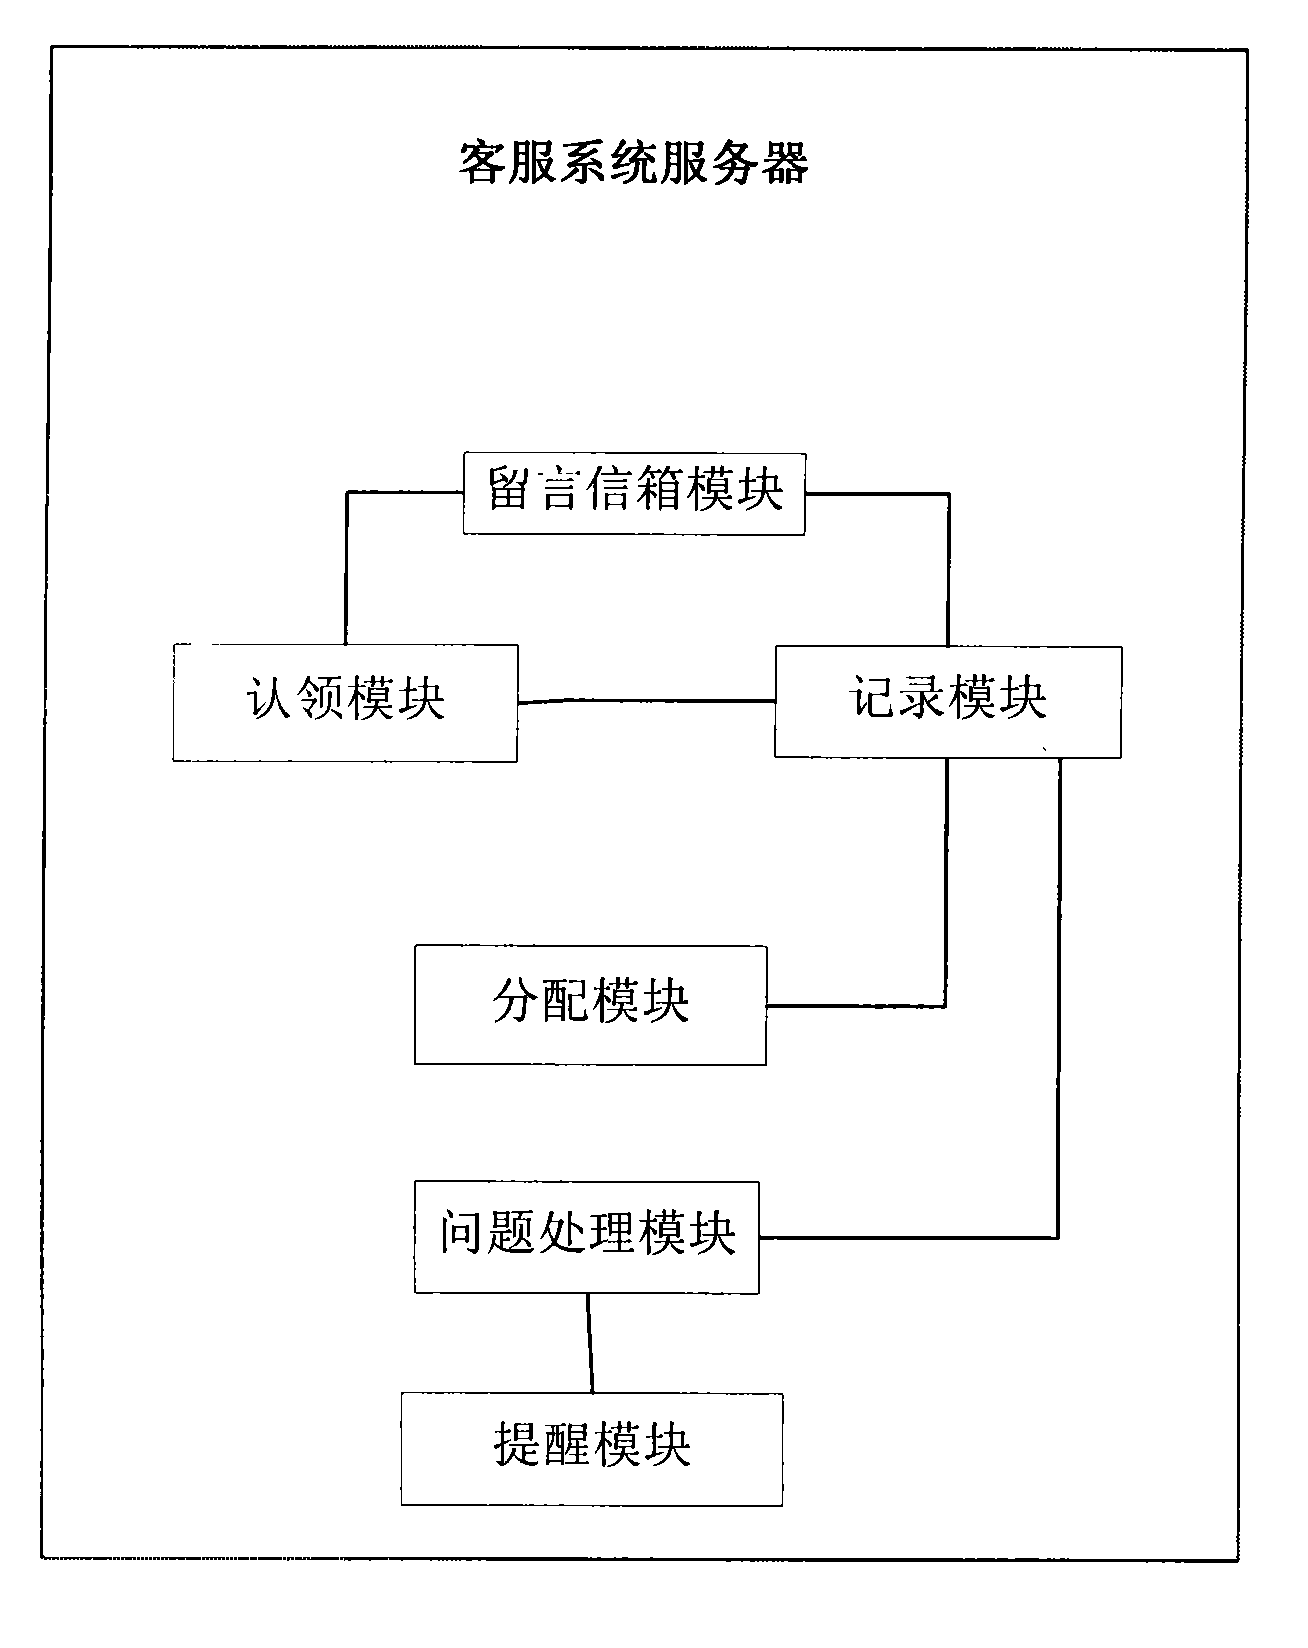 Method and system for submitting user questions through online customer service system